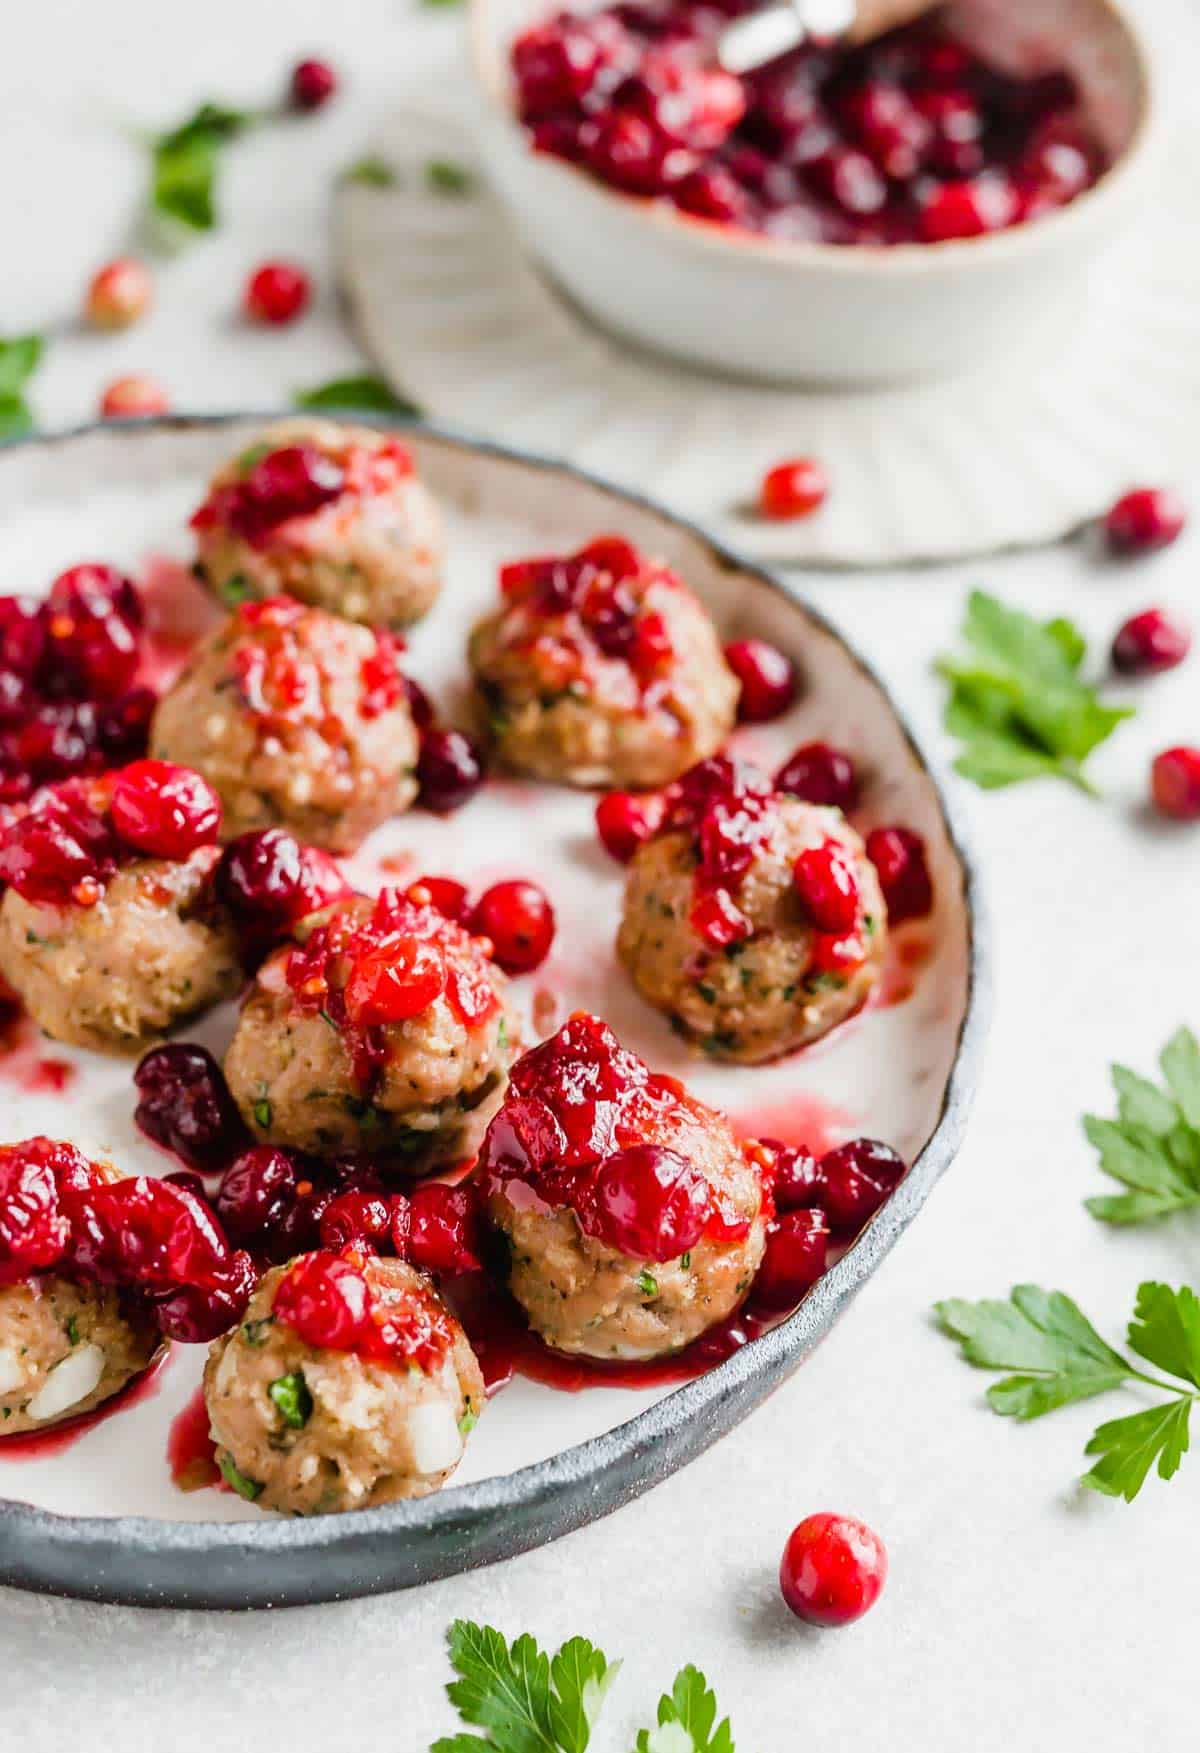 Turkey meatballs topped with cranberry sauce, on a white plate.